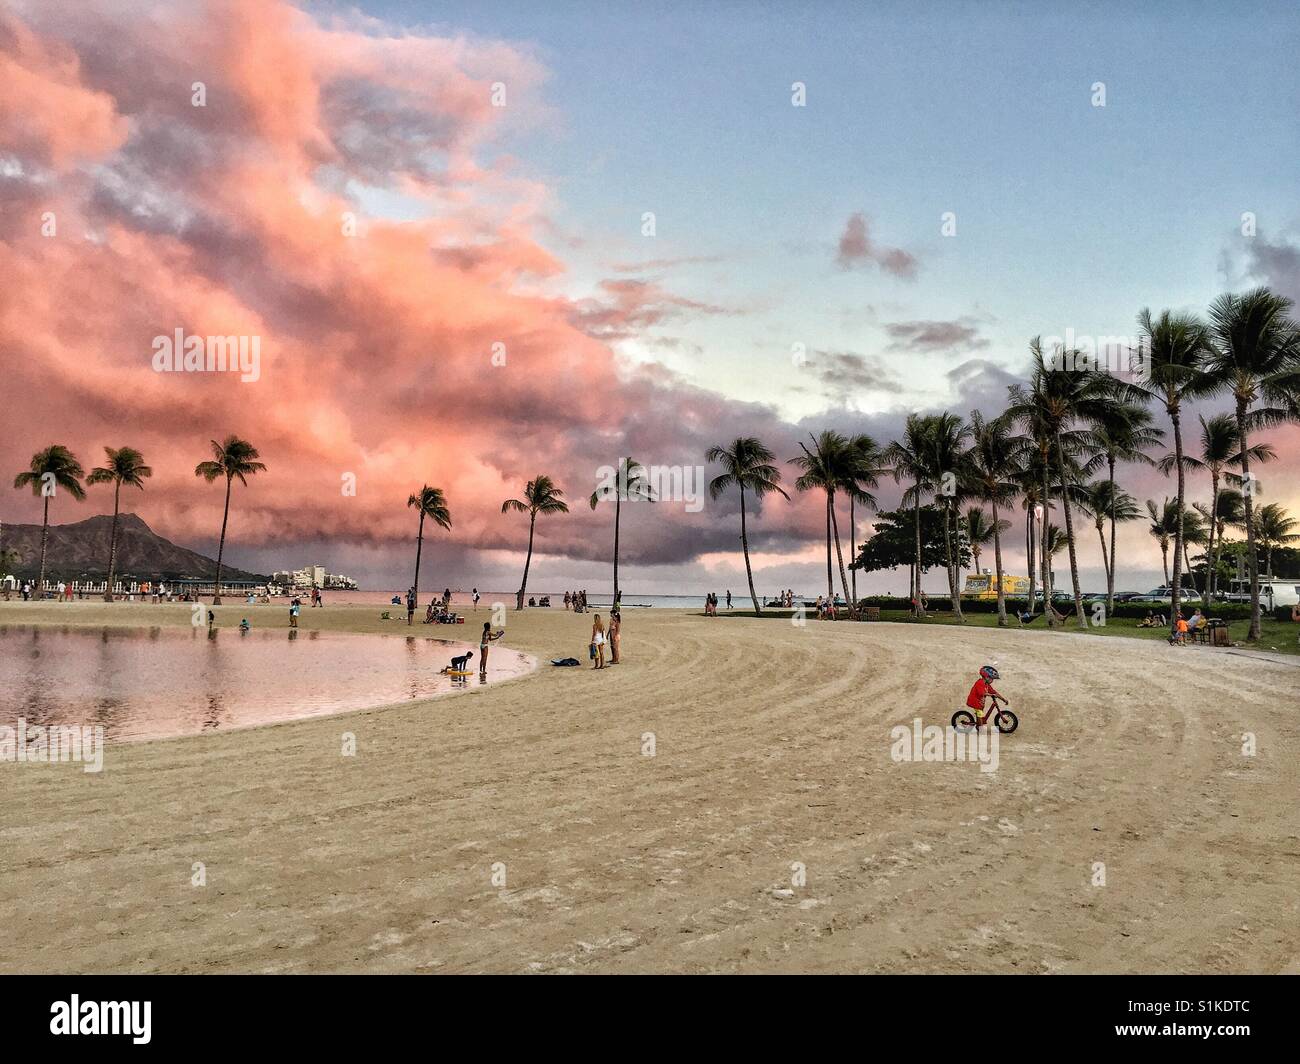 Waikiki beach and Diamond Head with pinks storm clouds overhead provide beautiful backdrop to small boy riding bicycle on sand by tropic palm tree lined lagoon, Oahu, Hawaii Stock Photo